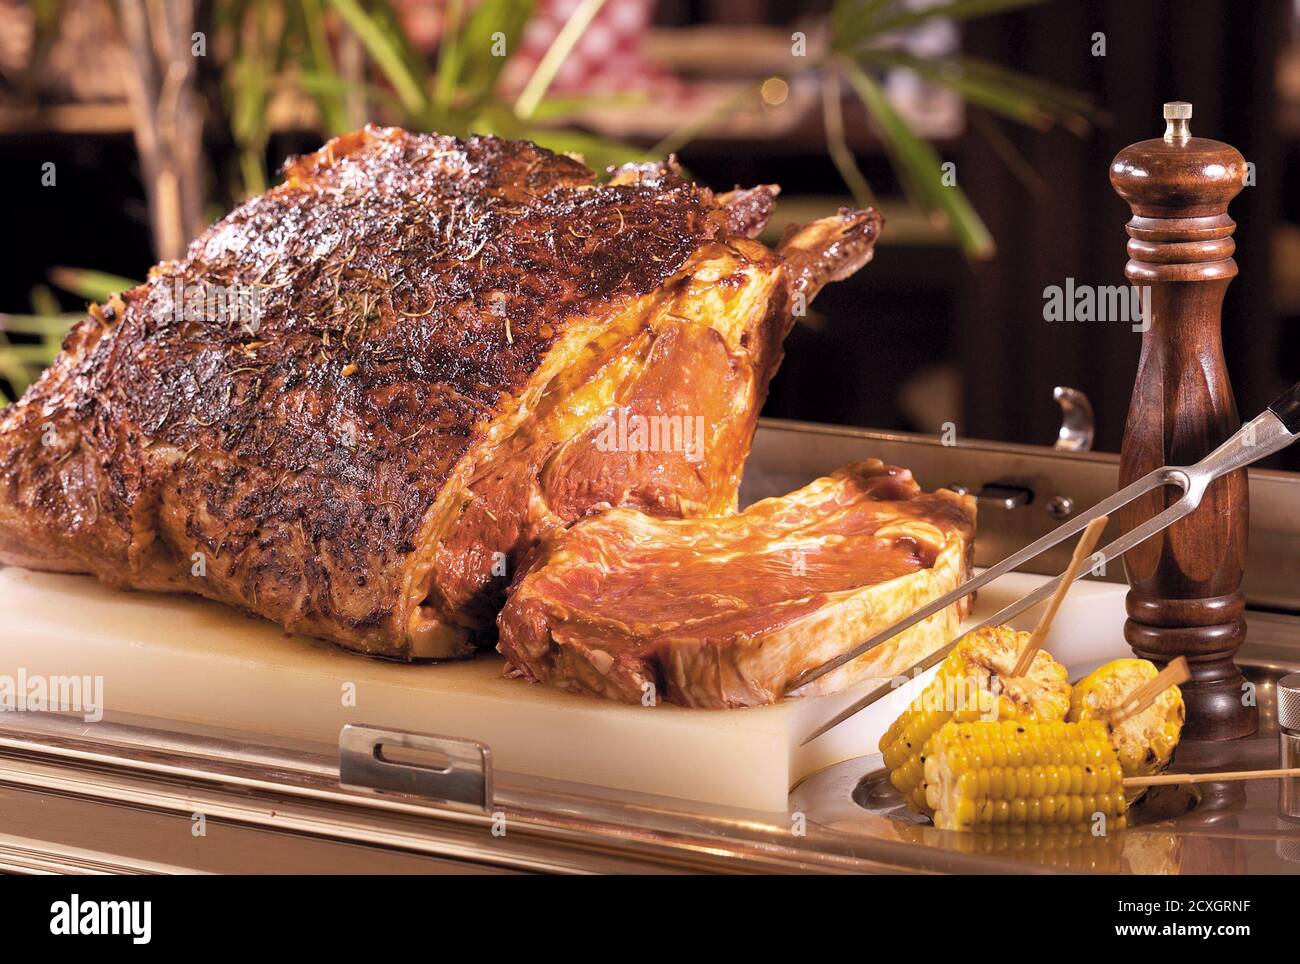 Delicious roasted meat served on a cutting board Stock Photo